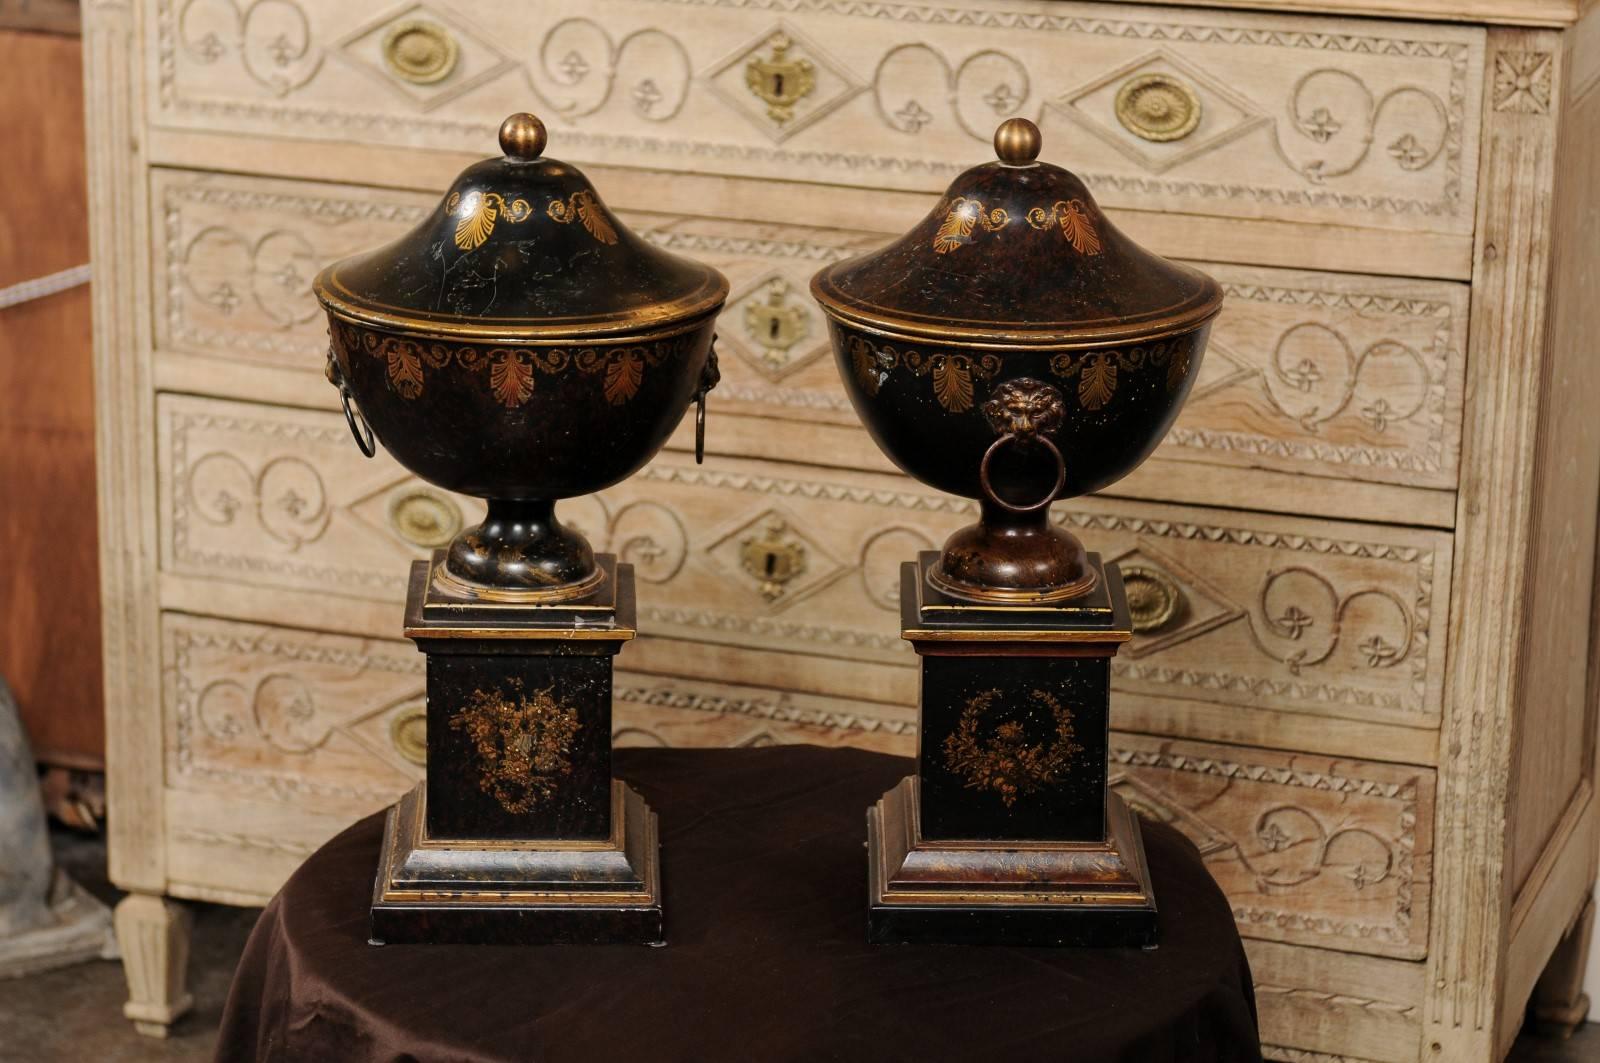 Pair of French 1920s Tole Black Tole Urns on Pedestals with Gilded Accents 1